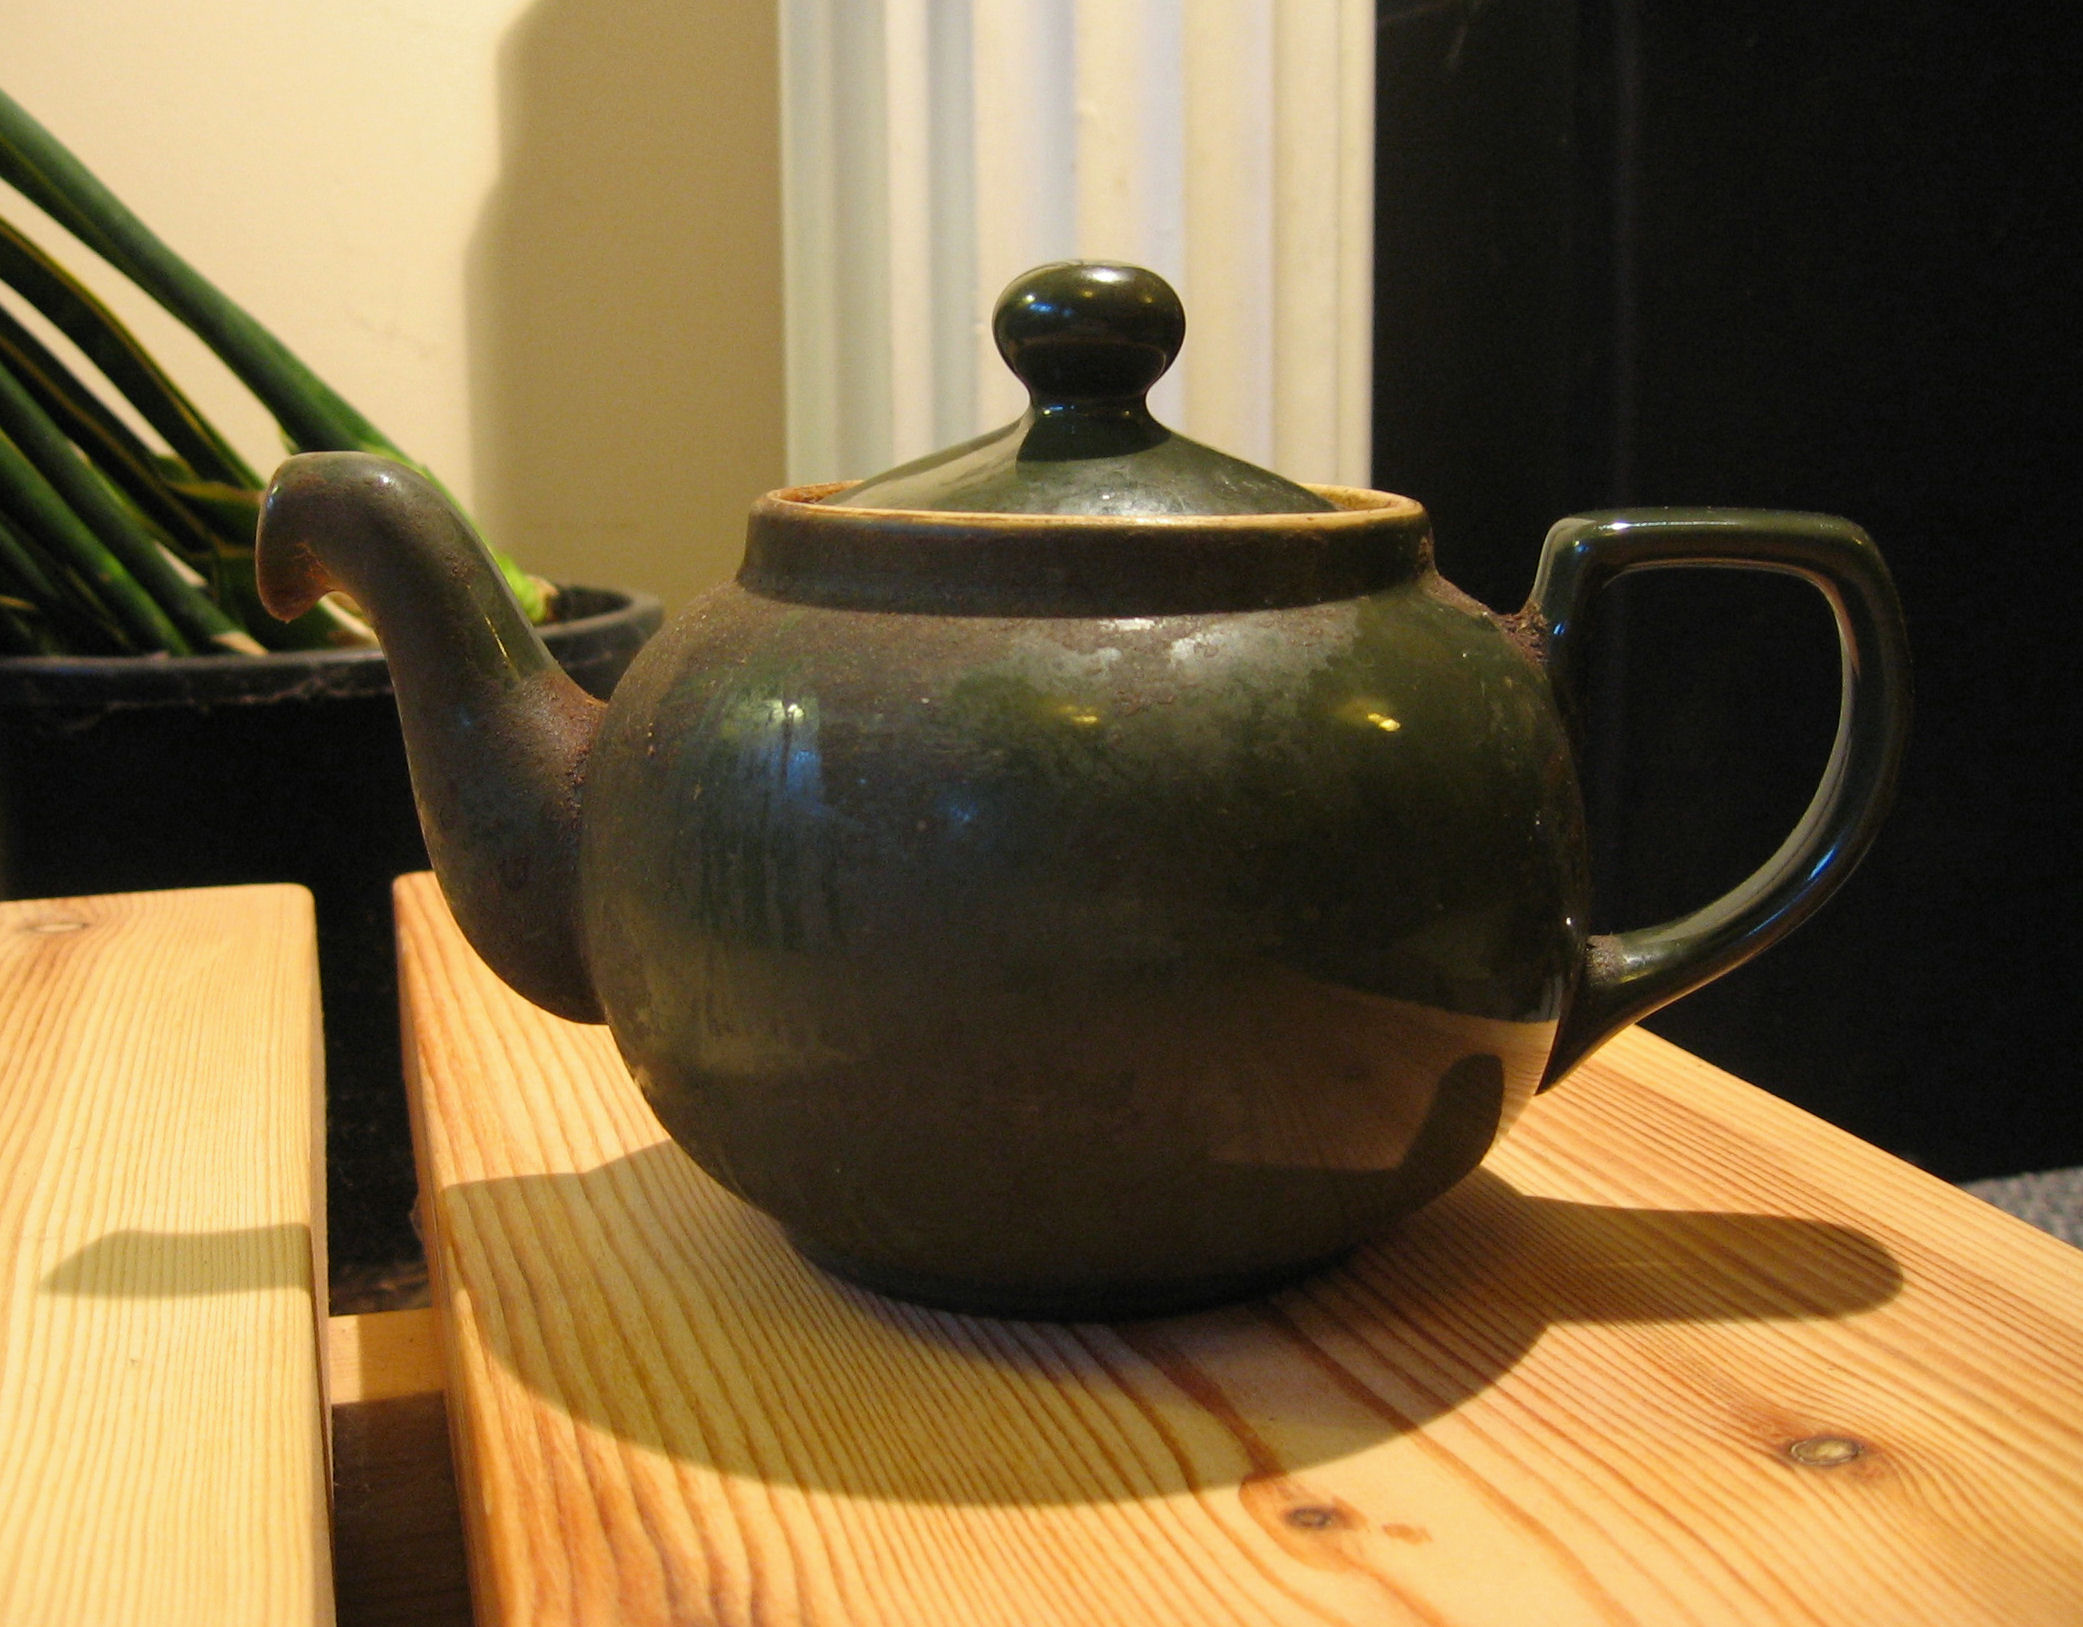 a ceramic teapot on a wooden surface